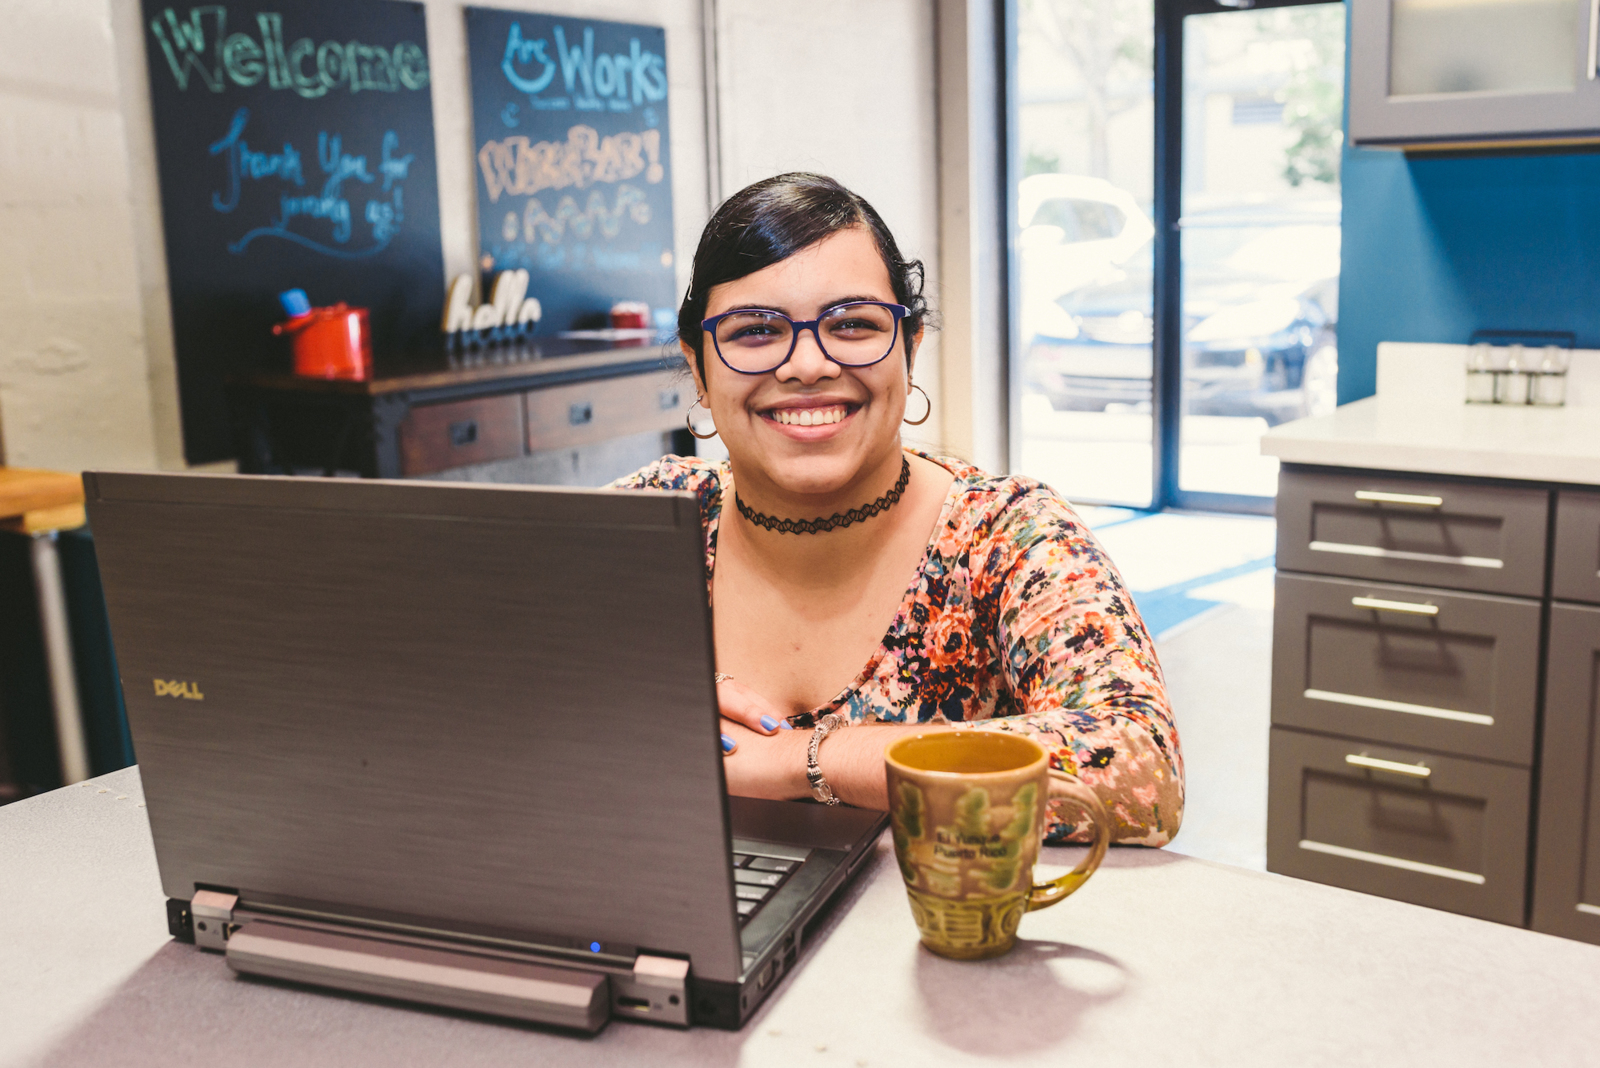 Woman using a laptop with a brown and green coffee cup next to it wearing a colorful top smiling for the camera